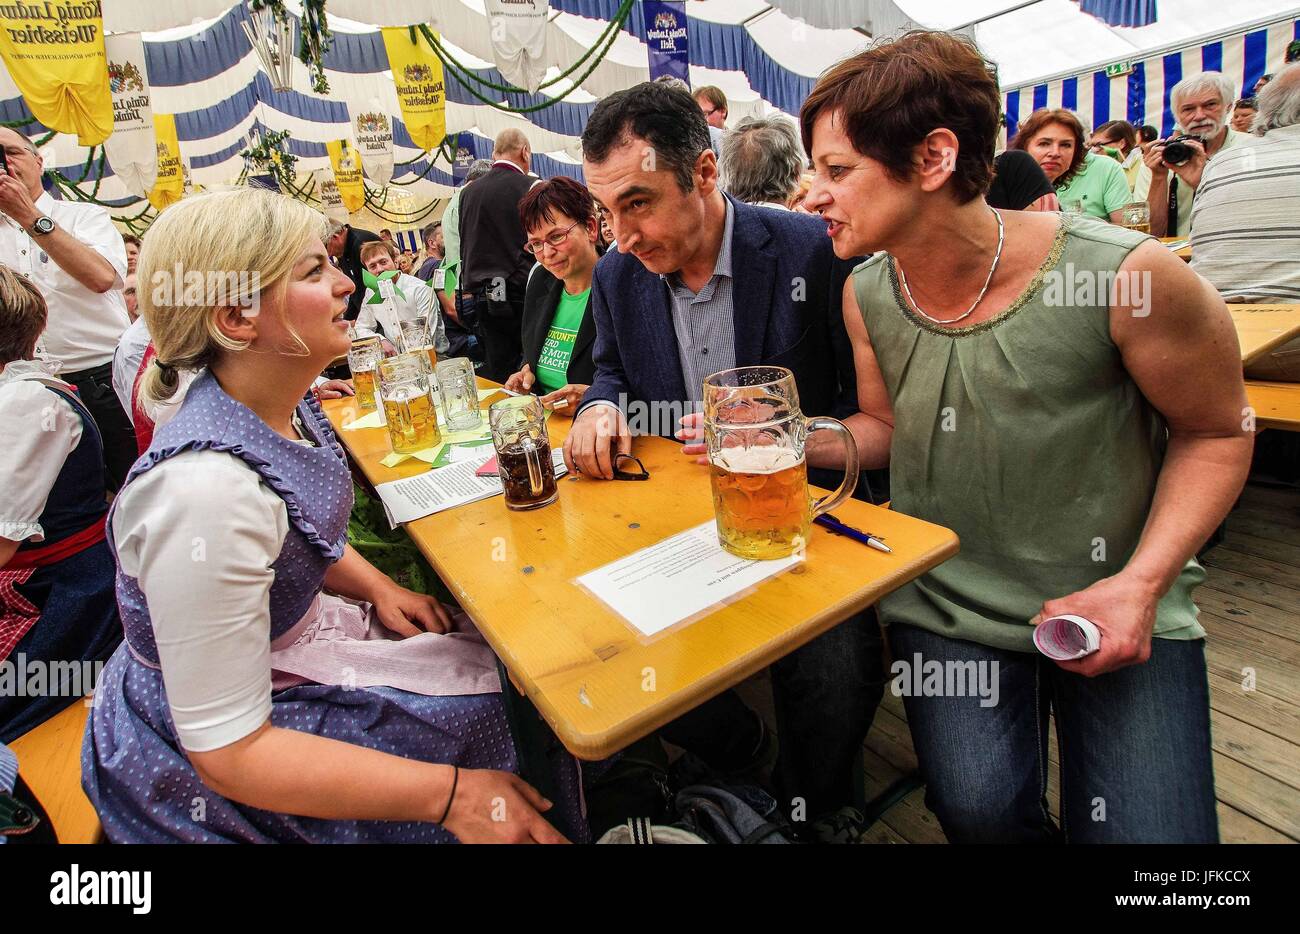 Tutzing, Bayern, Germany. 1st July, 2017. Green politician Cem Ã–zdemir captivated an audience of over 800 as he visited the Munich area to make a 'Fruehschoppen'' appearance at a festival tent in nearby Tutzing. In mainly southern German and Austrian culture, Fruehschoppen is the tradition of having an alcoholic beverage before noon. Furthermore, he served as guest speaker of the event in addition to Bavarian Landtag member Katharina Schulze. Ã–zdemir is renowned and highly-skilled orator.Ã–zdemir was a German Bundestag member from 1994-2002 and again since 2013. Credit: ZUMA Press, Inc./Ala Stock Photo